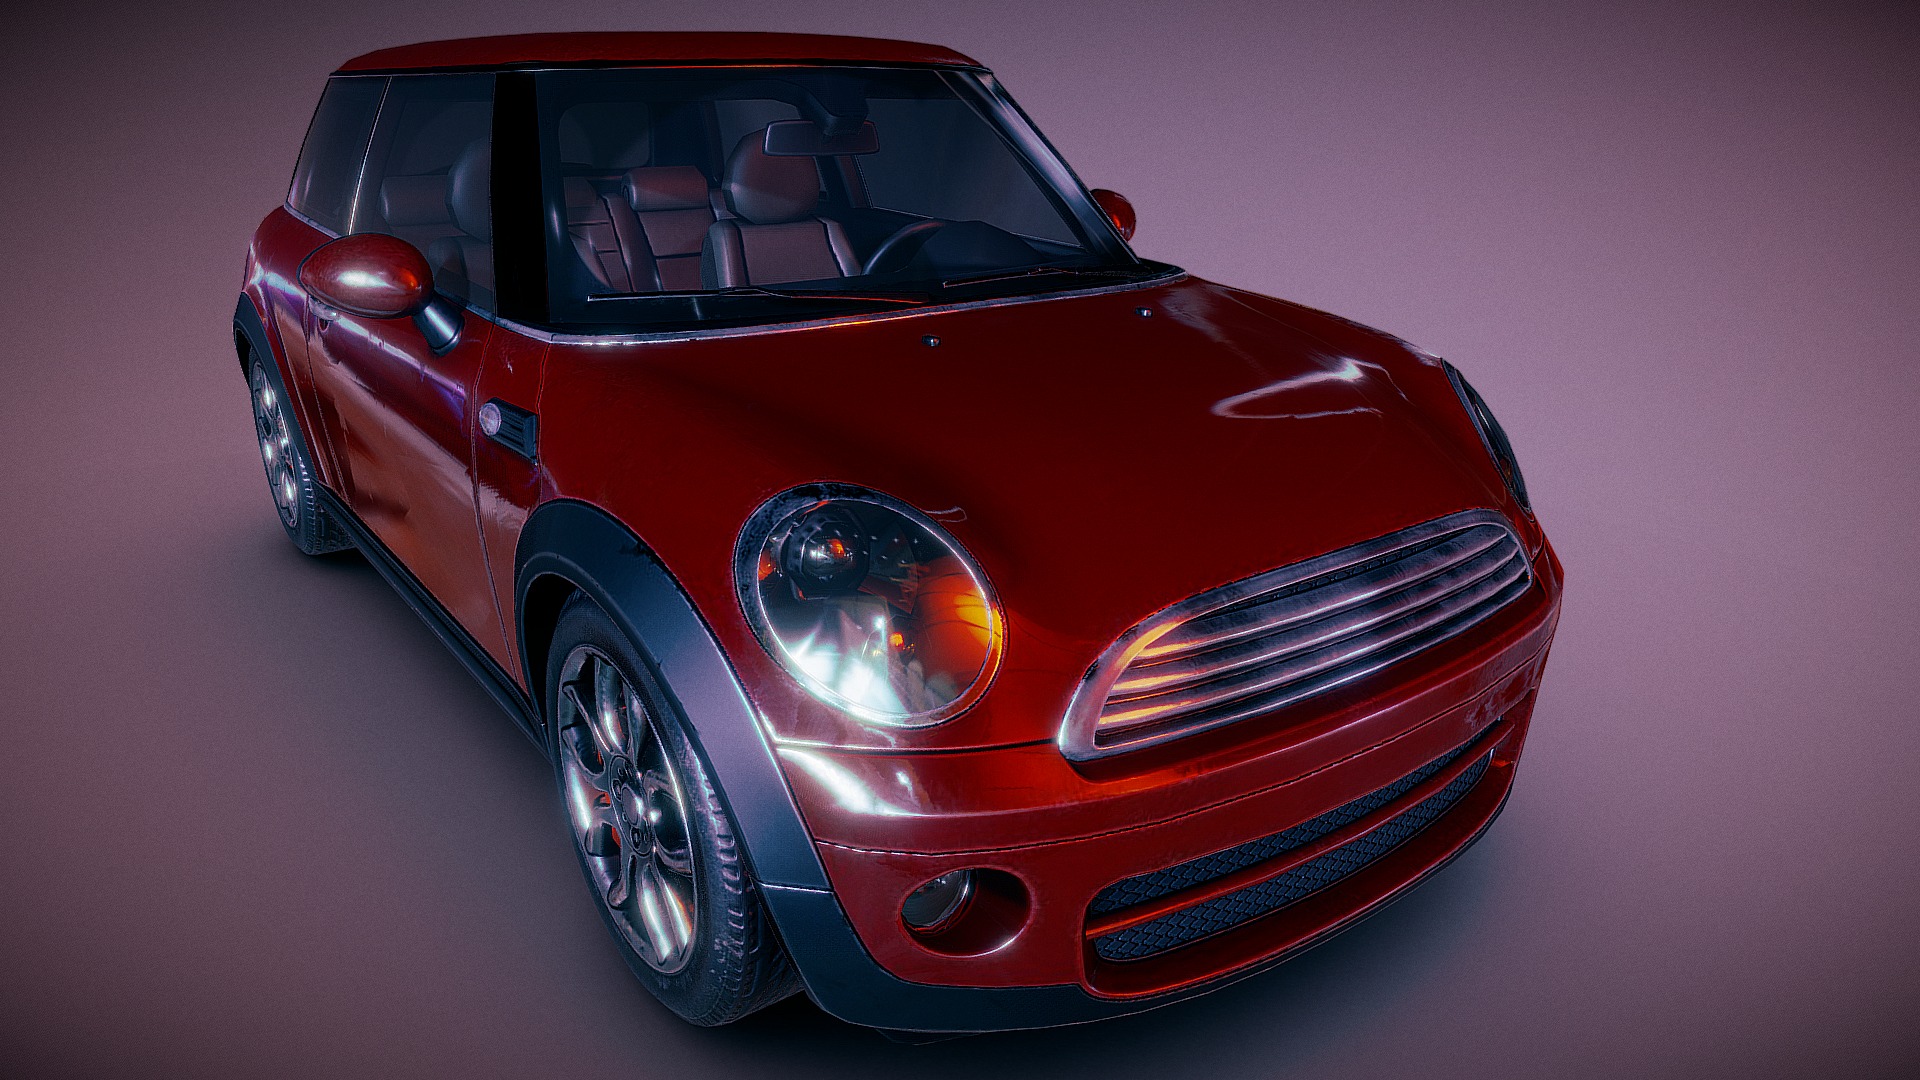 3D model MiniCooper - This is a 3D model of the MiniCooper. The 3D model is about a red sports car.